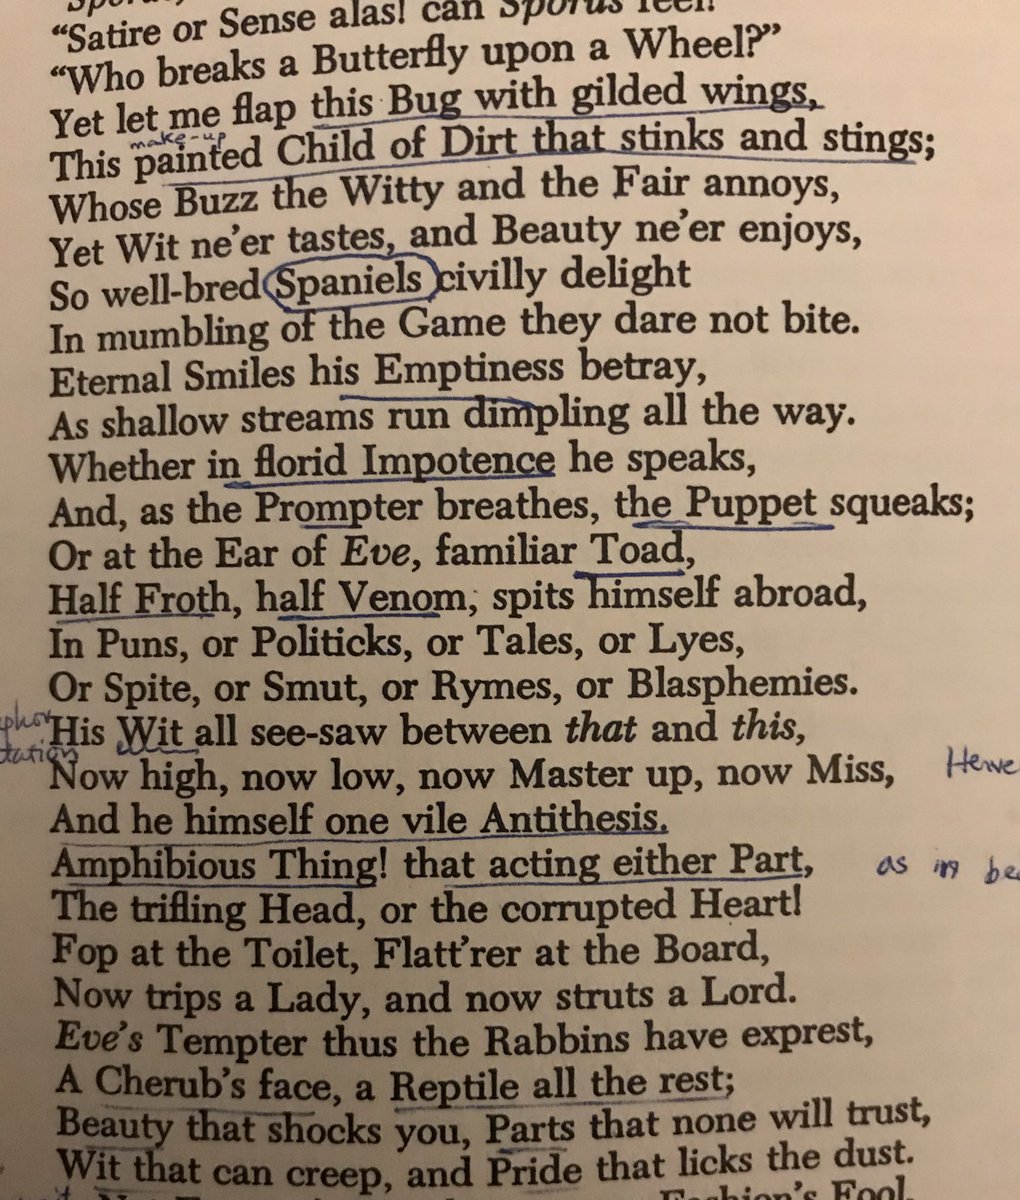 And then there’s Sporus, the serpent at Wslpole’s ear, the lampooning propagandist Lord Hervey. Pope gives some great lines to Arbuthnot - ‘That thing of silk’, ‘that mere white curd of Ass’s milk’ - but saves the best for himself. This is trenchant satire and very lively verse.